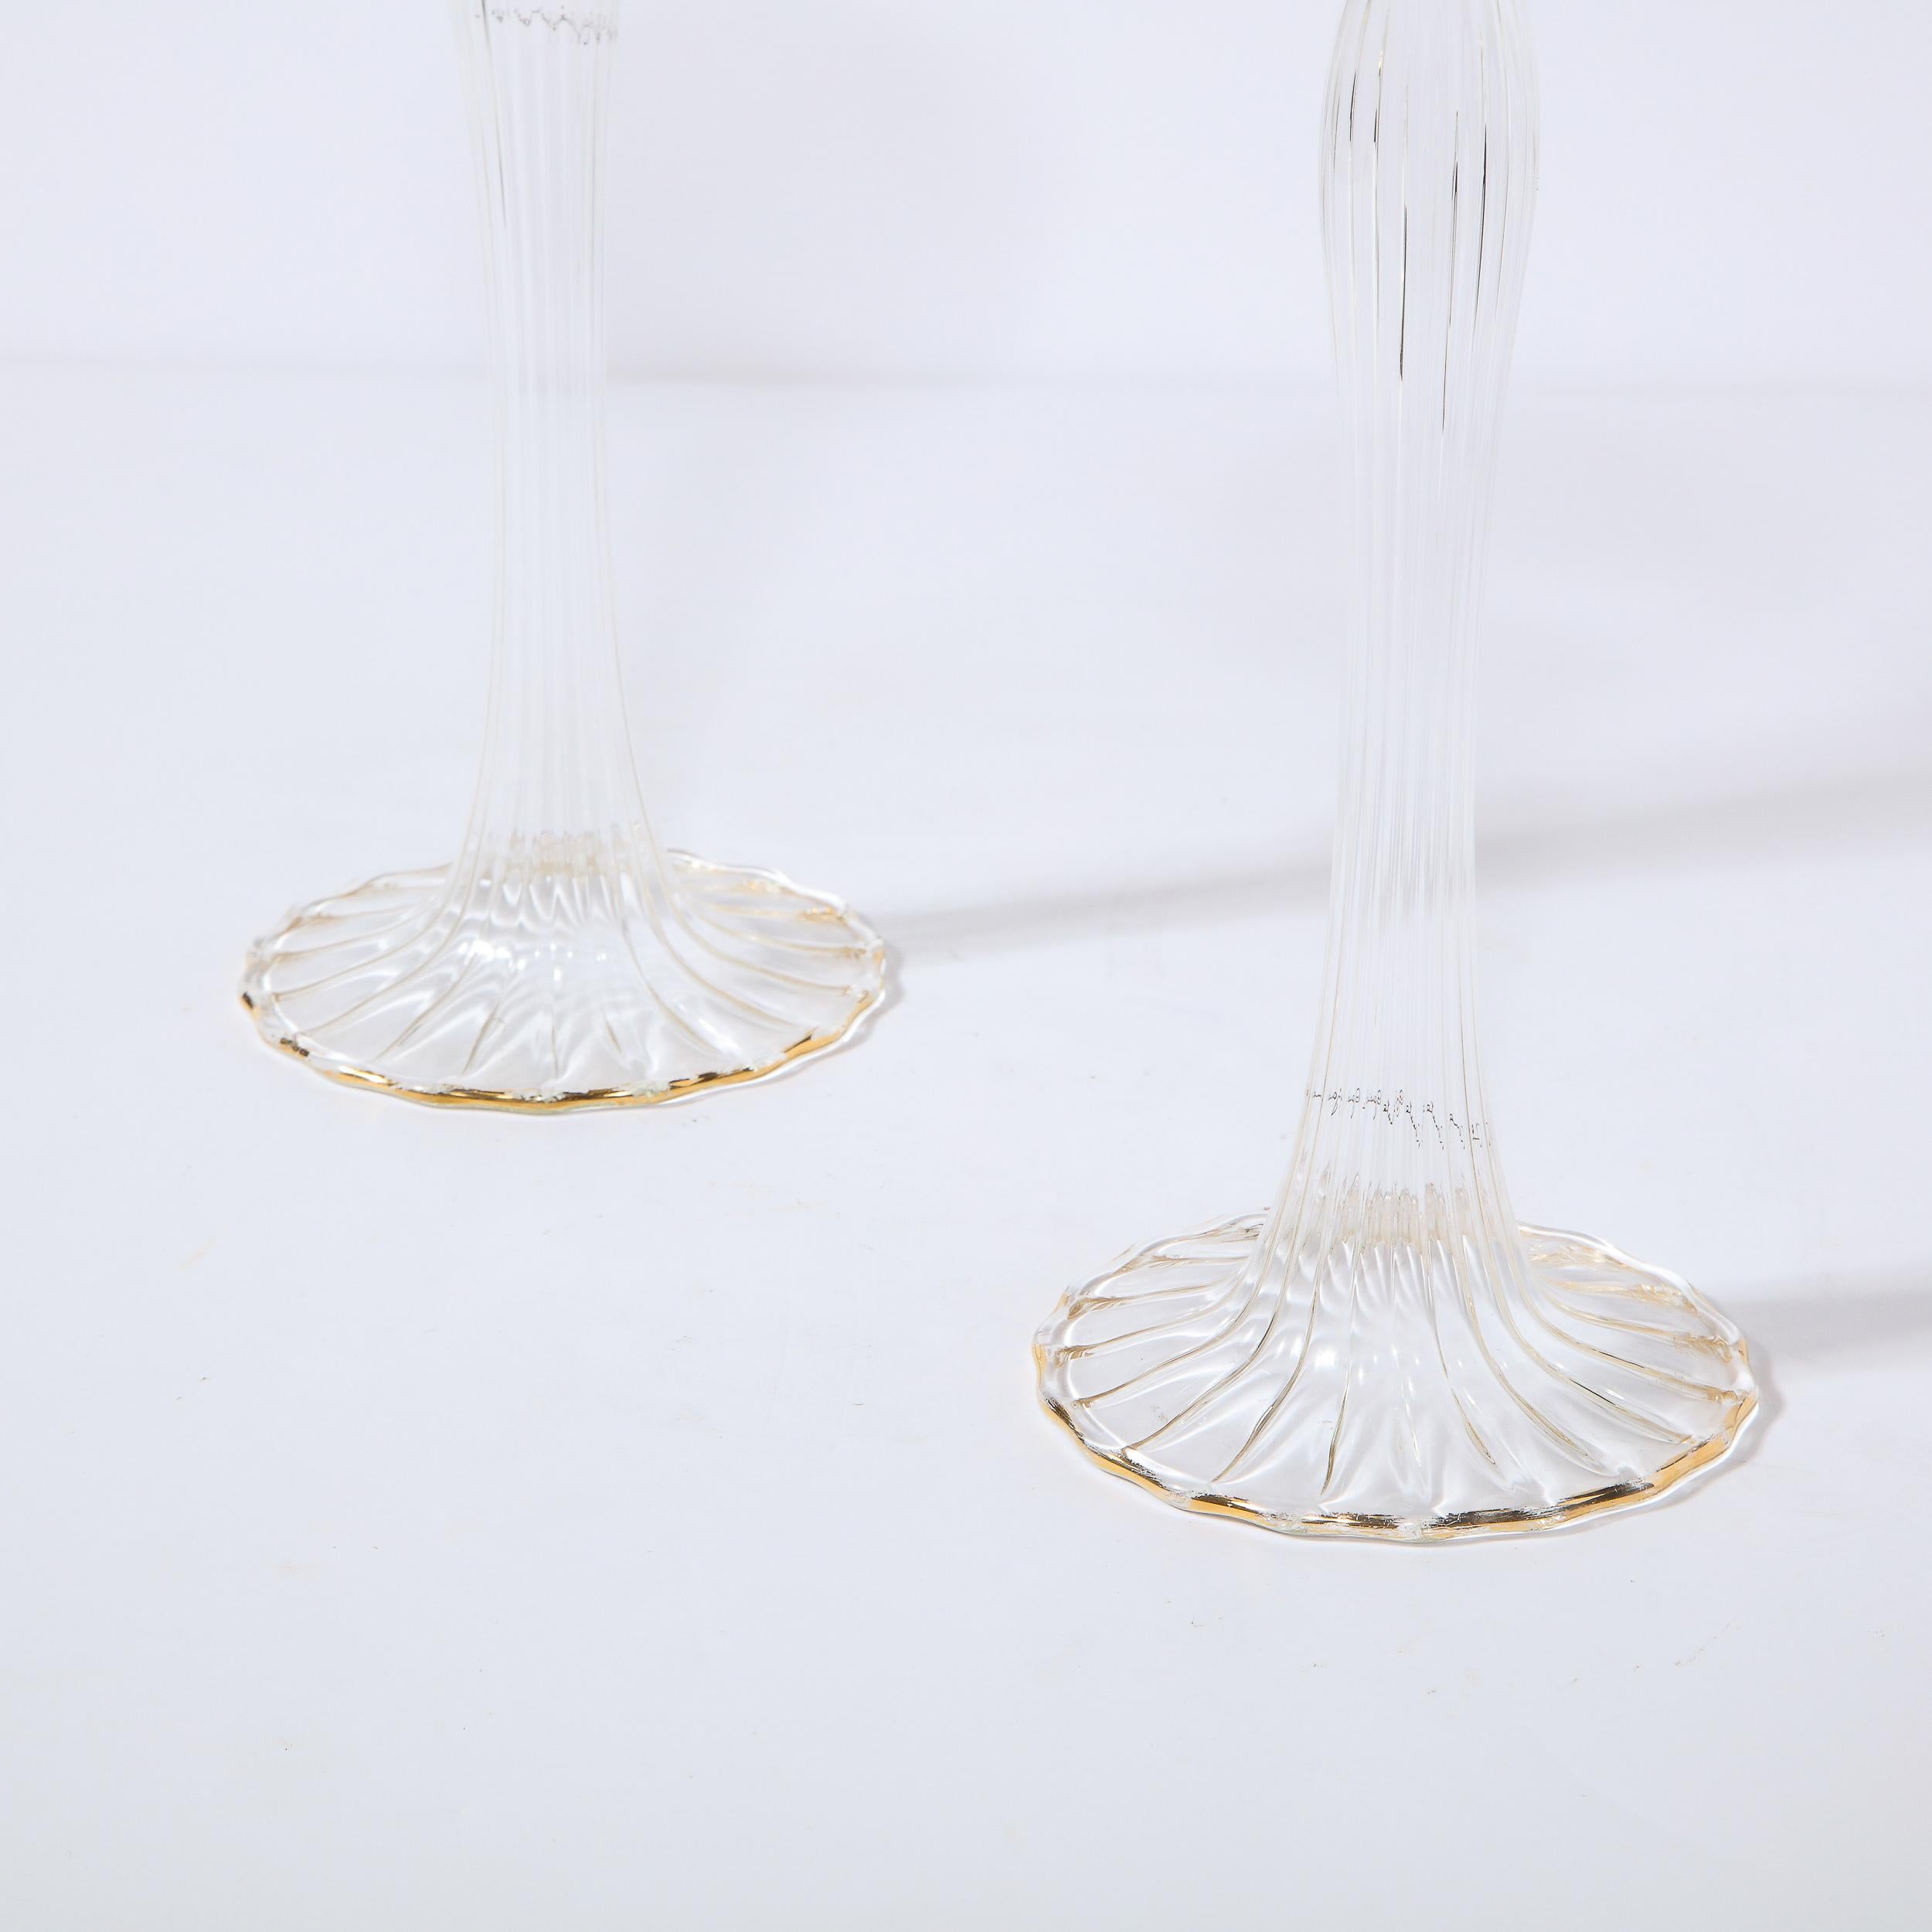 Pair of Signed Renata Gandini Modernist Clear Glass & 24kt Gold Candlesticks In Excellent Condition For Sale In New York, NY